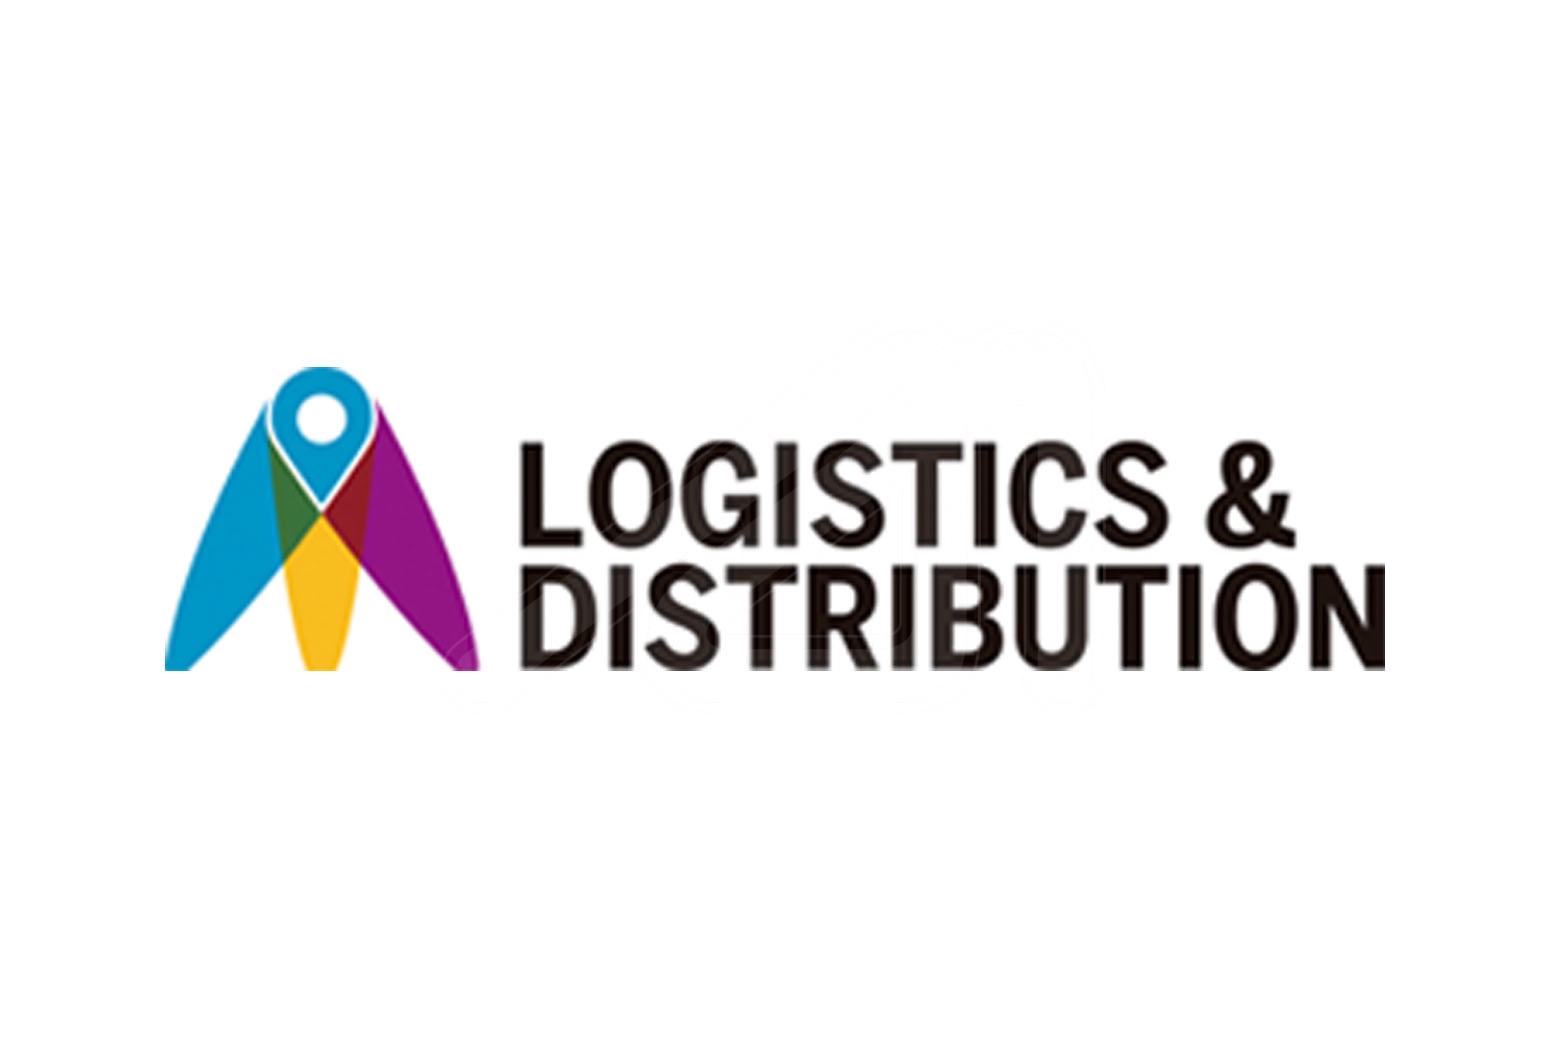 WE ARE COMING BACK TO LOGISTICS WITH RELEVANT INNOVATIONS FOR THIS SECTOR